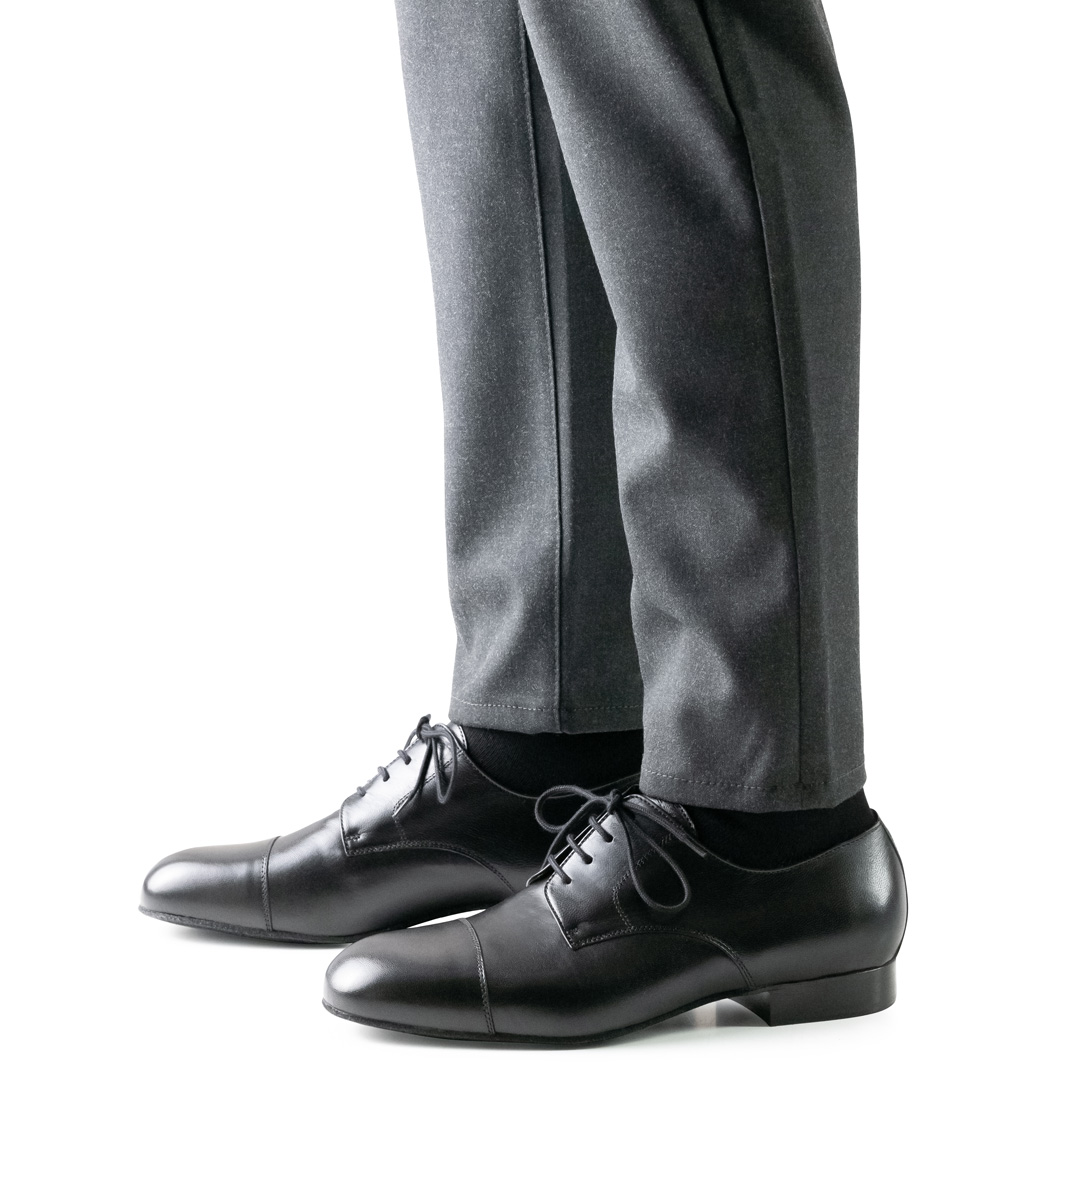 grey trousers in combination with black men's dance shoes by Werner Kern for wide feet